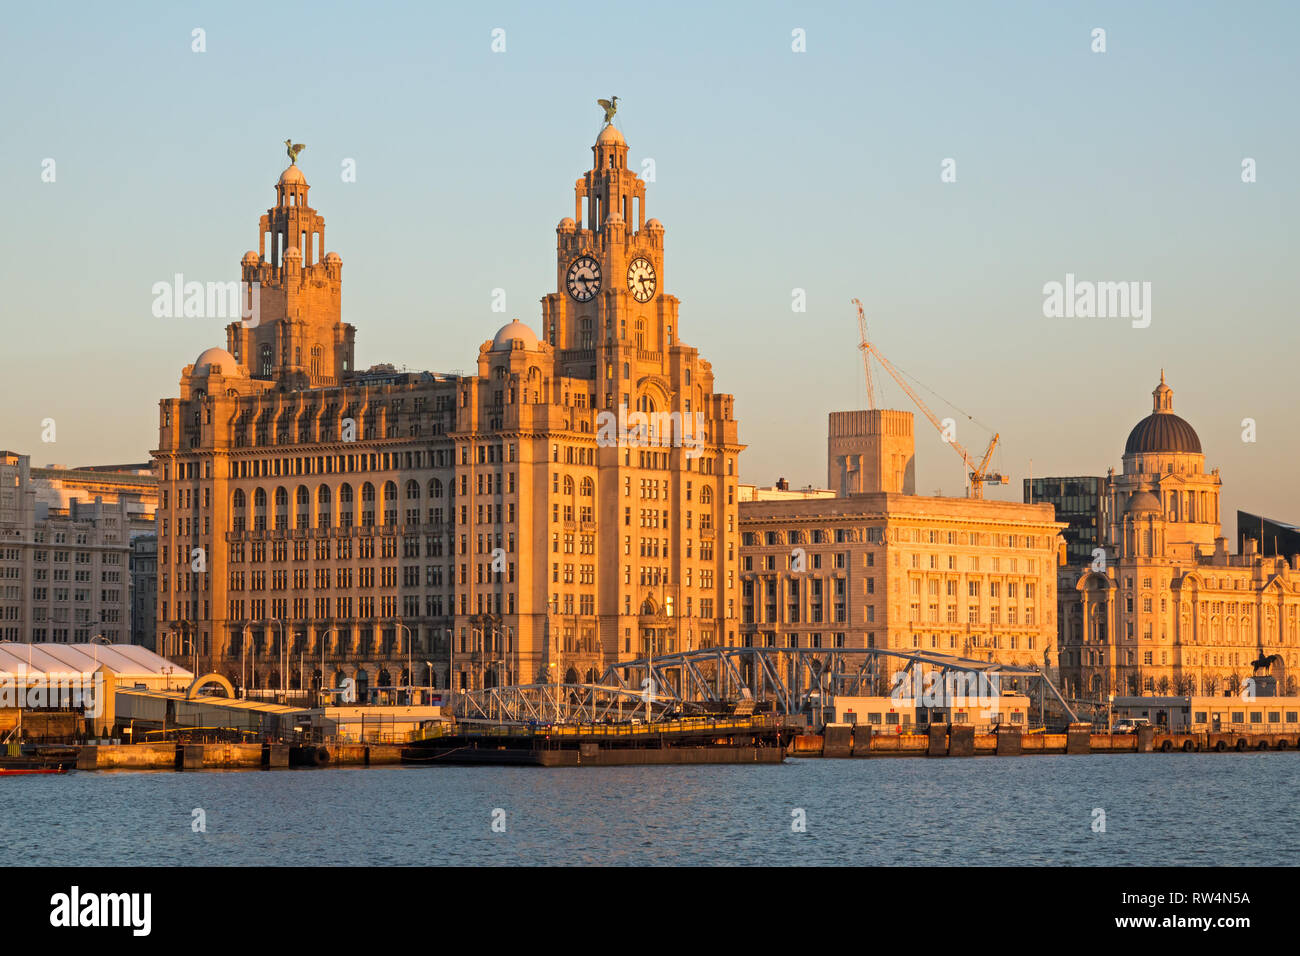 Liverpool's world famous waterfront buildings lit up by the late evening sun. Stock Photo